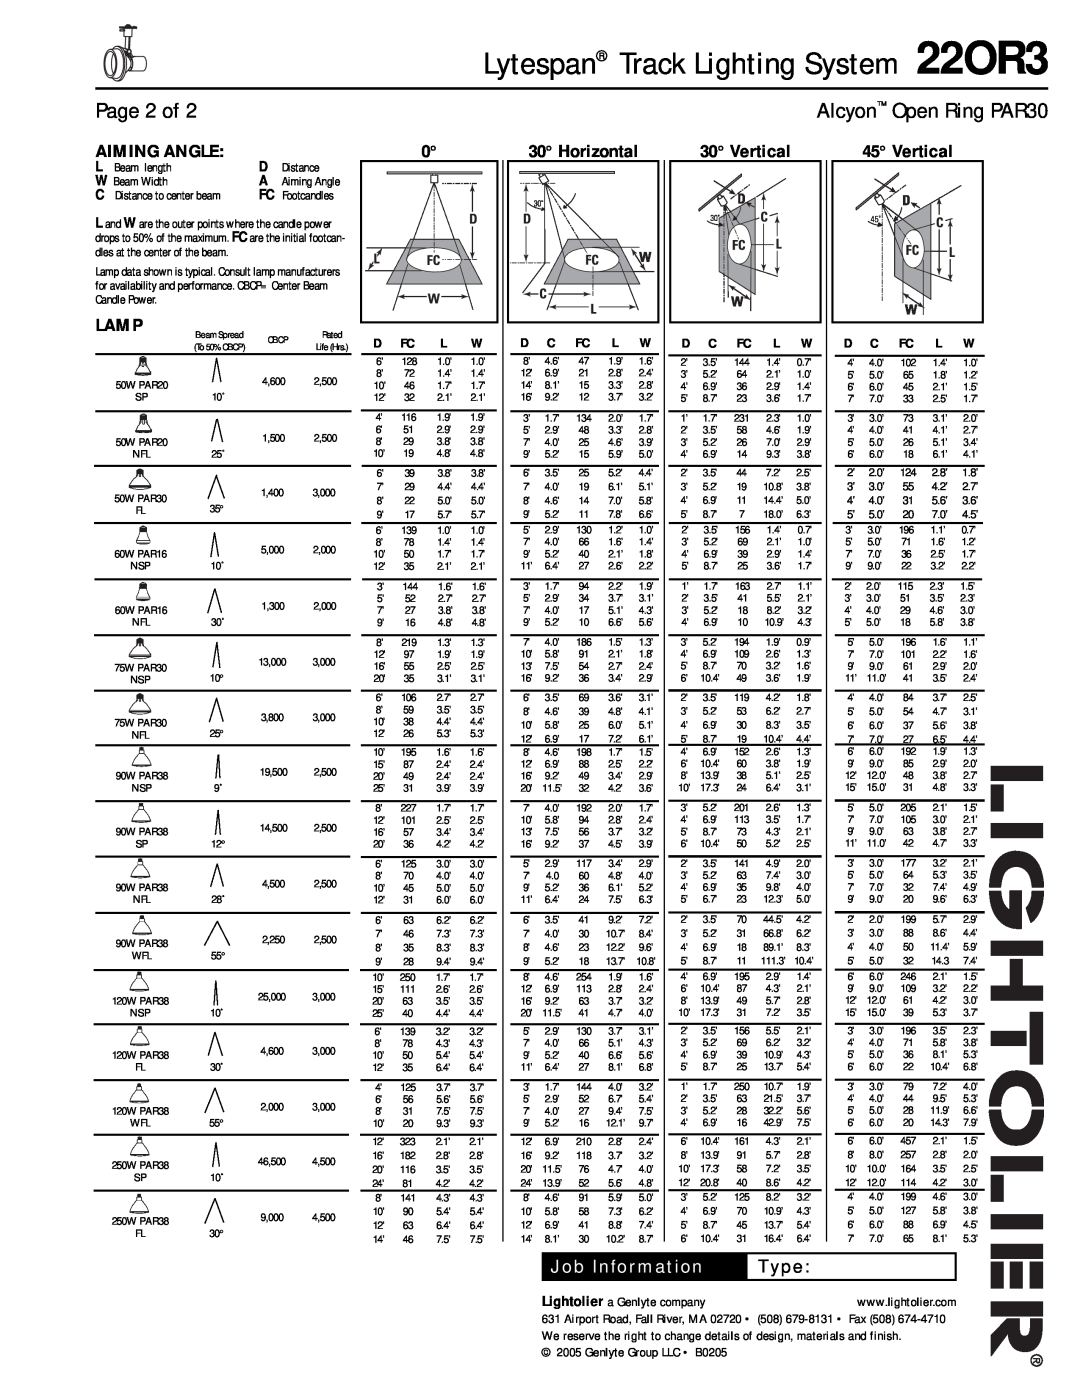 Lightolier 22OR3 manual Page 2 of, Aiming Angle, Horizontal, Lamp, Vertical, Type, Lytespan Track Lighting System 